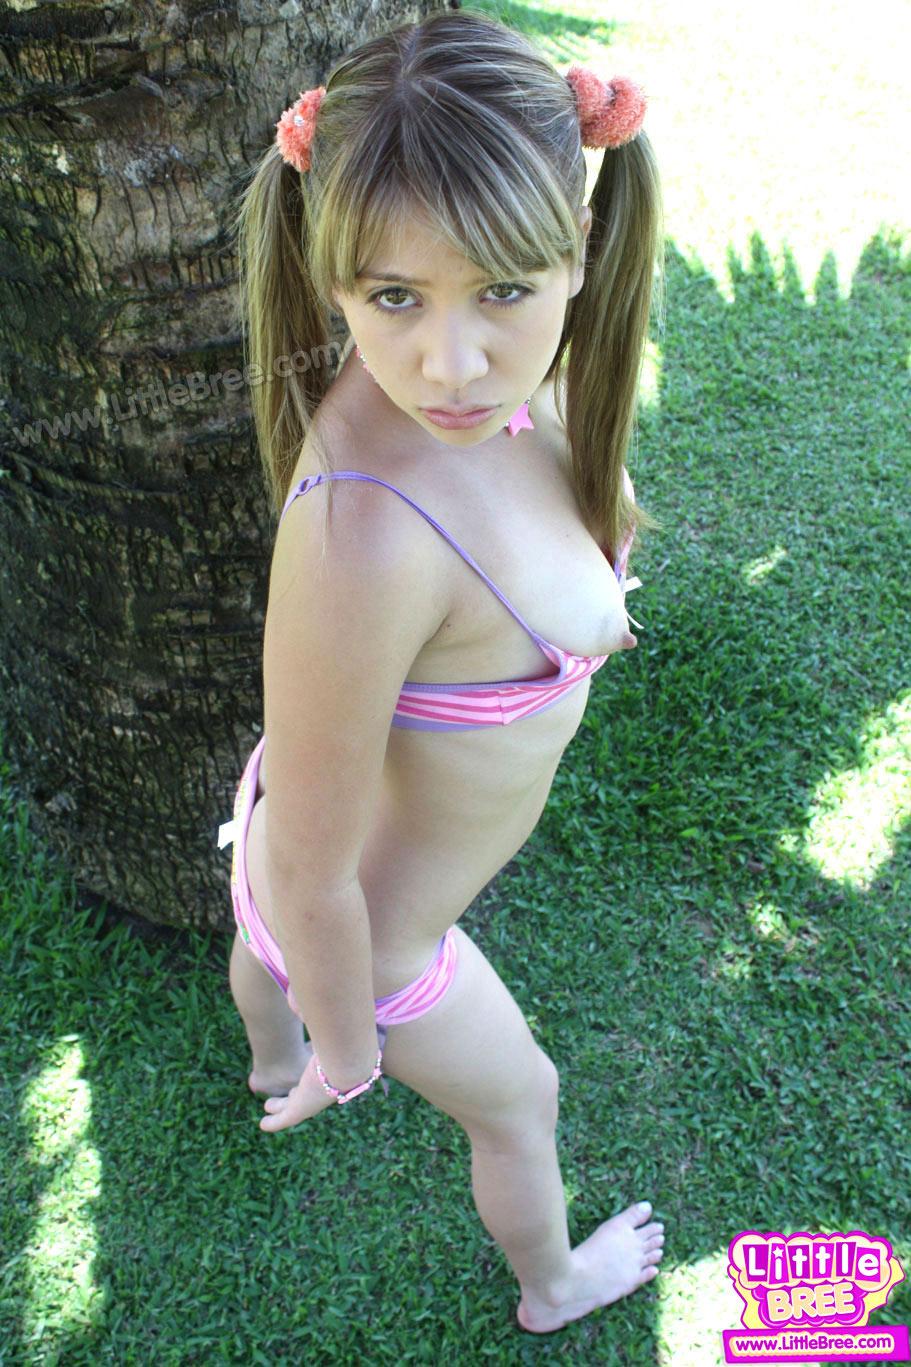 Pictures of Little Bree flashing you outside #58995022